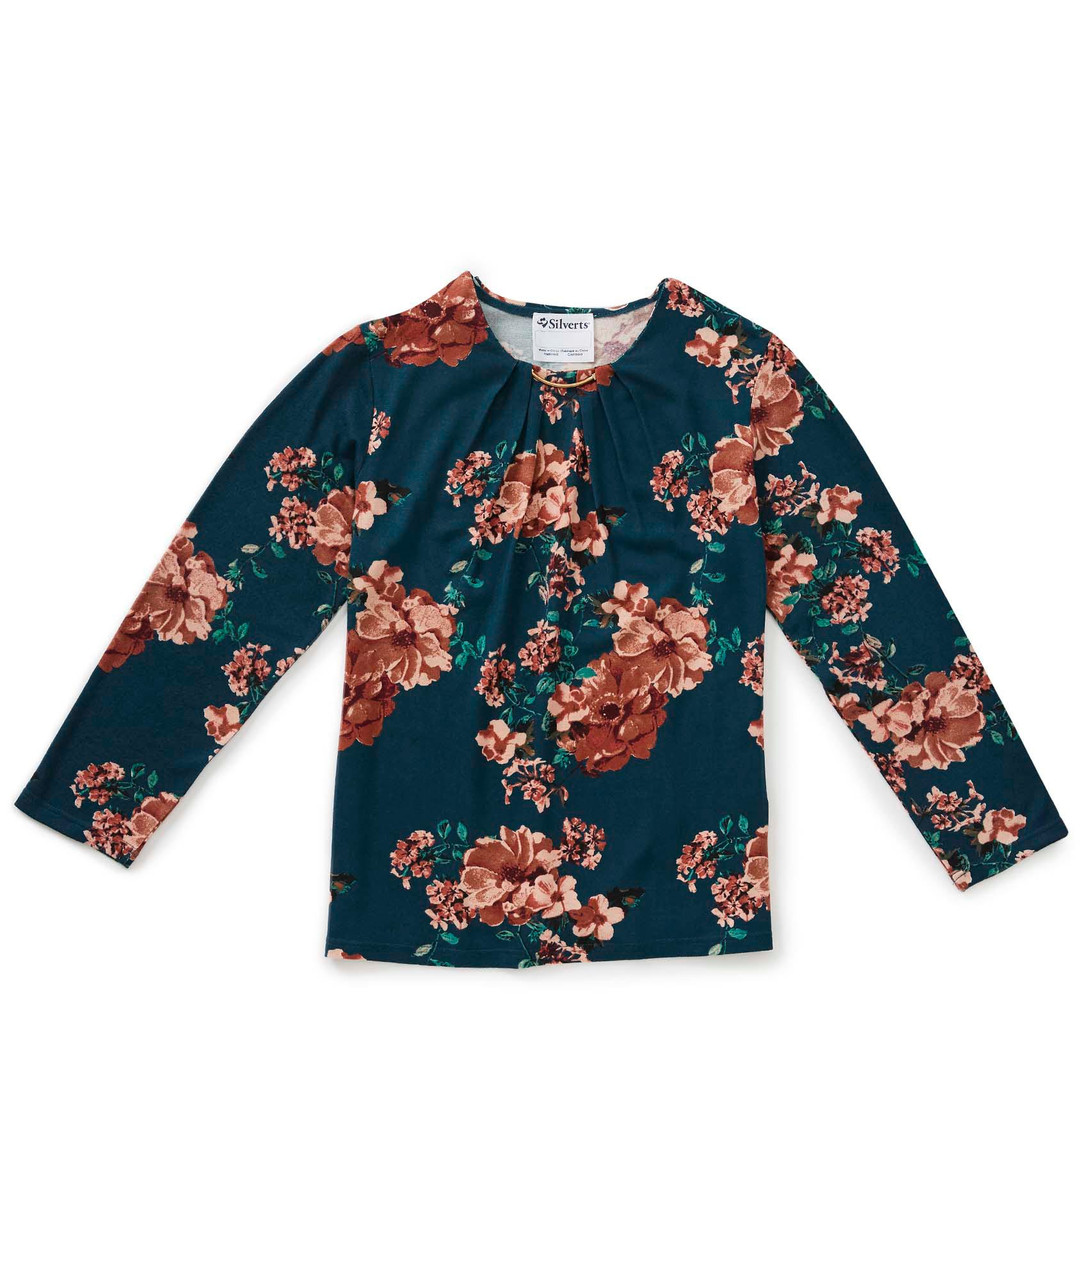 Silverts SV22130 Womens Long Sleeves Adaptive Open Back Sweater Knit Top Teal Flower, Size=S, SV22130-SV1405-S